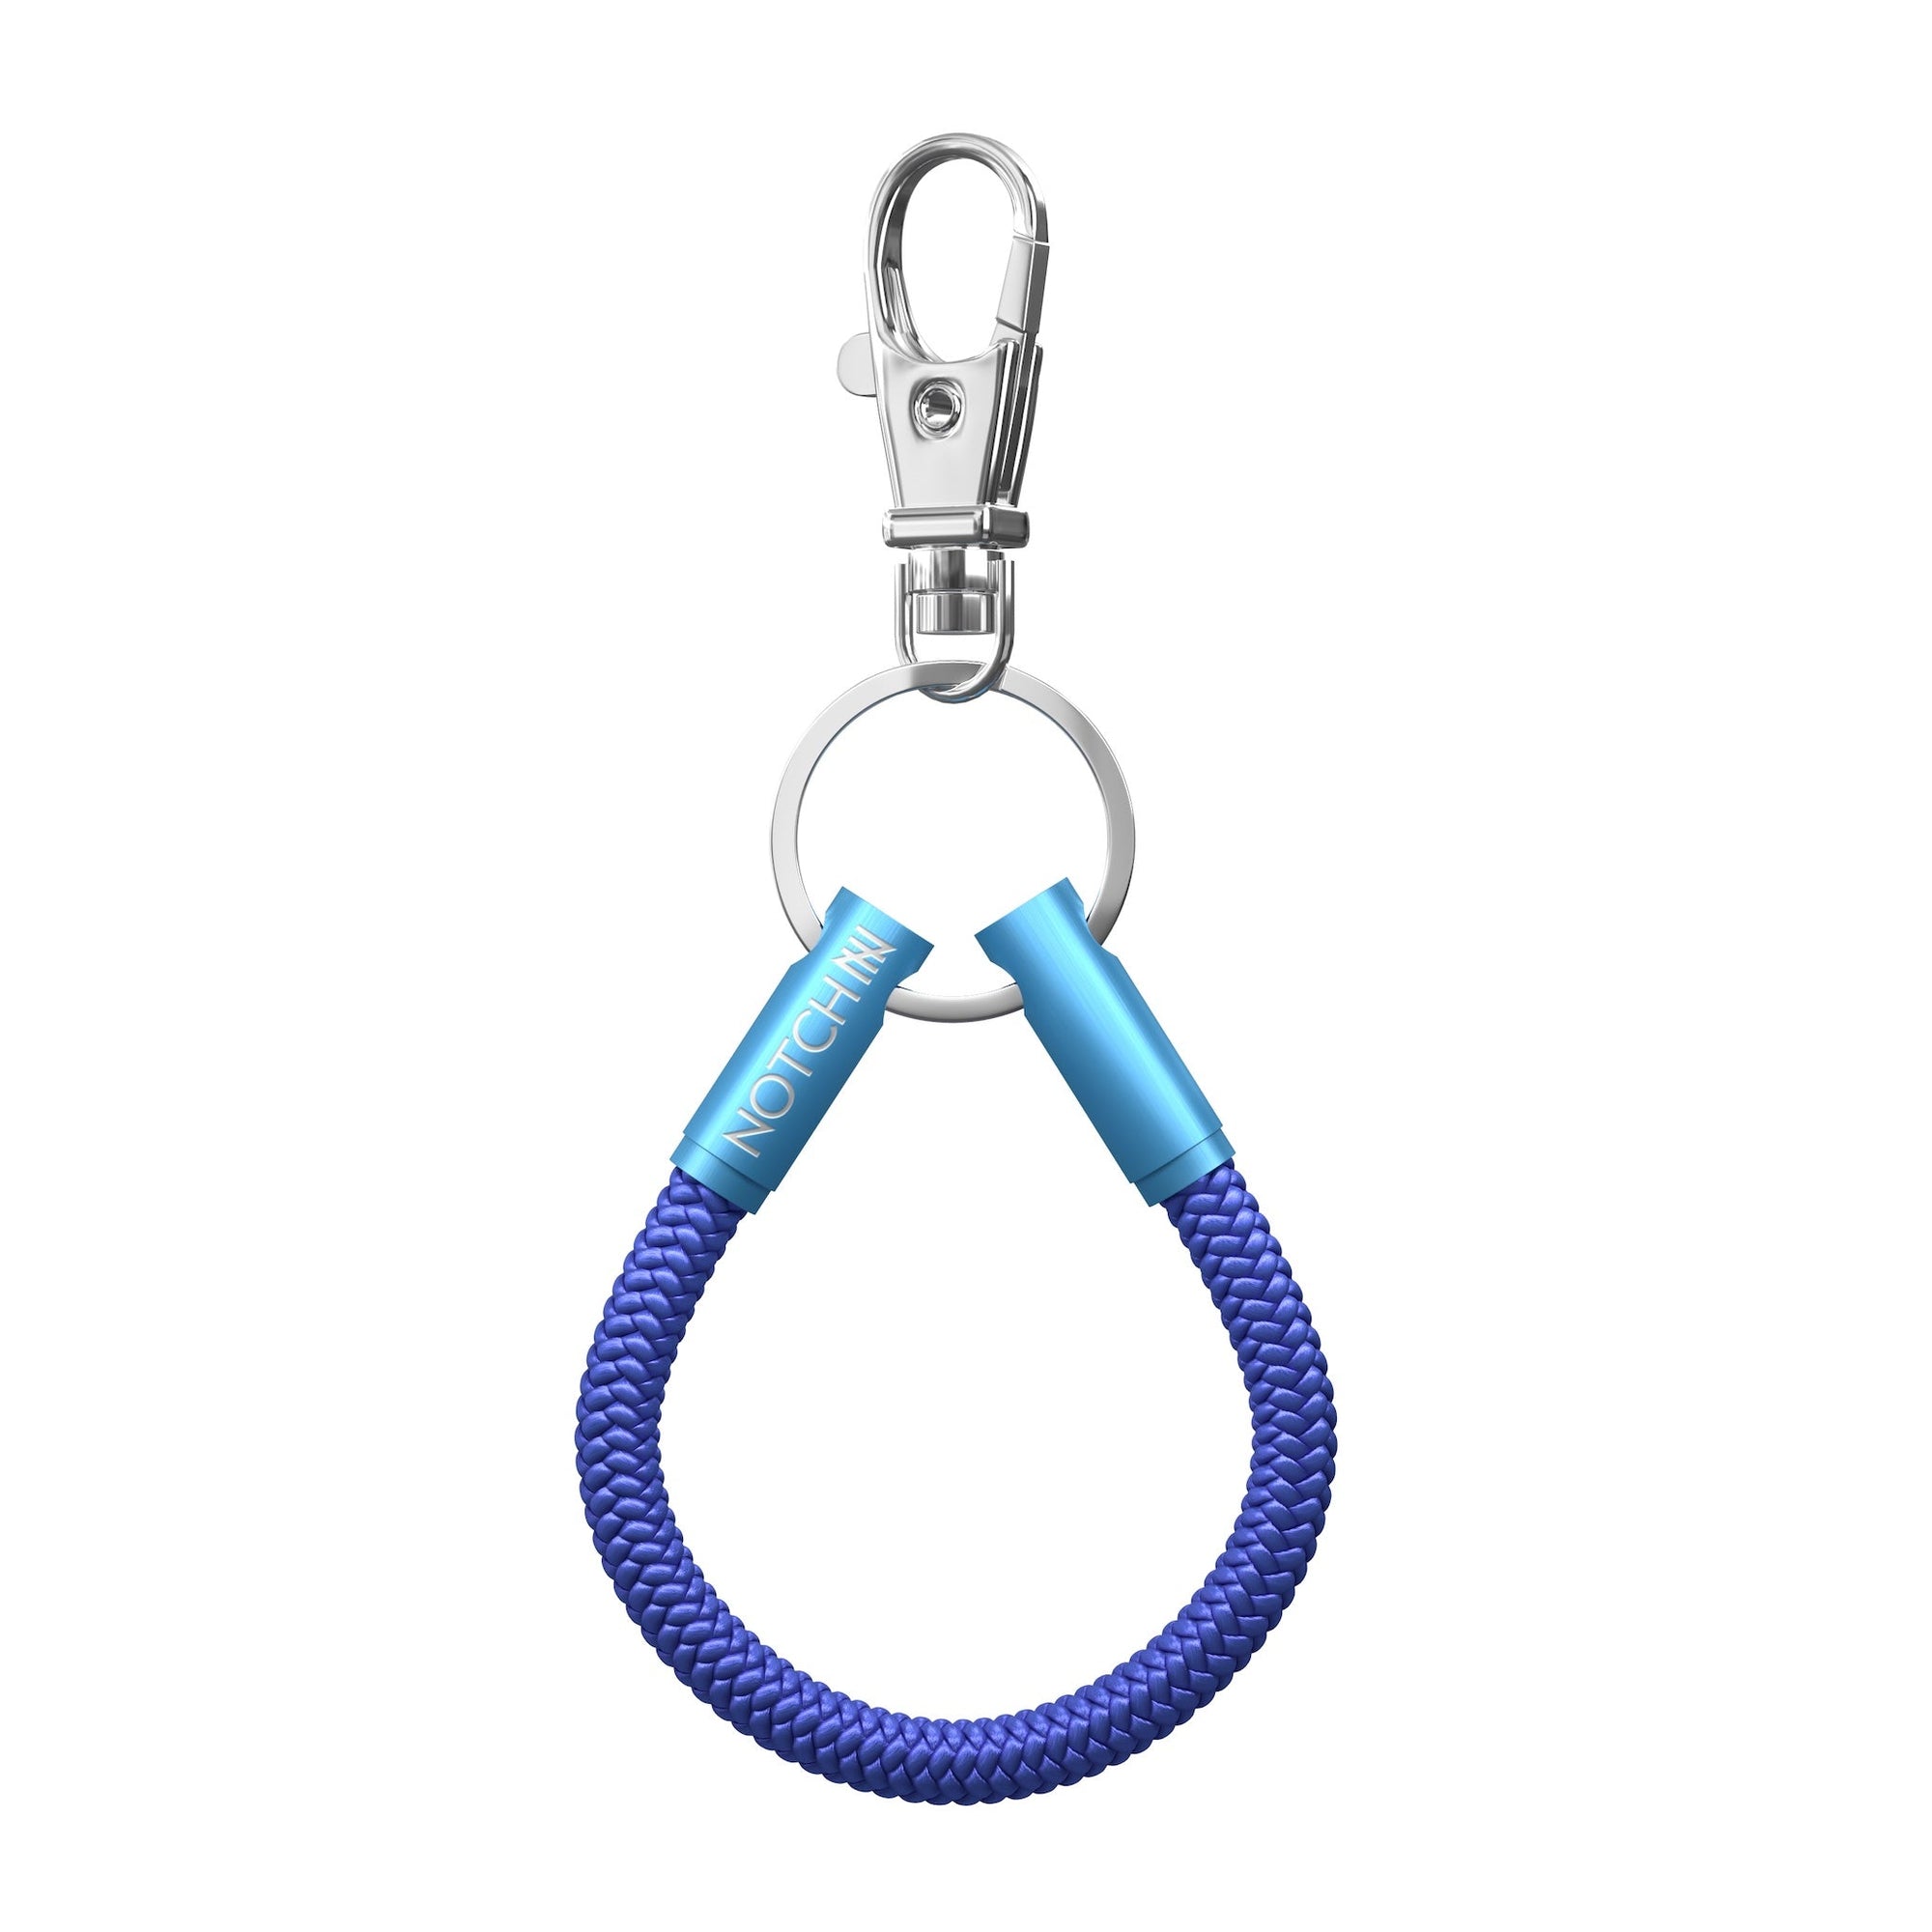 Blue Cord NOTCH Loop with blue aluminium ends by the CGA